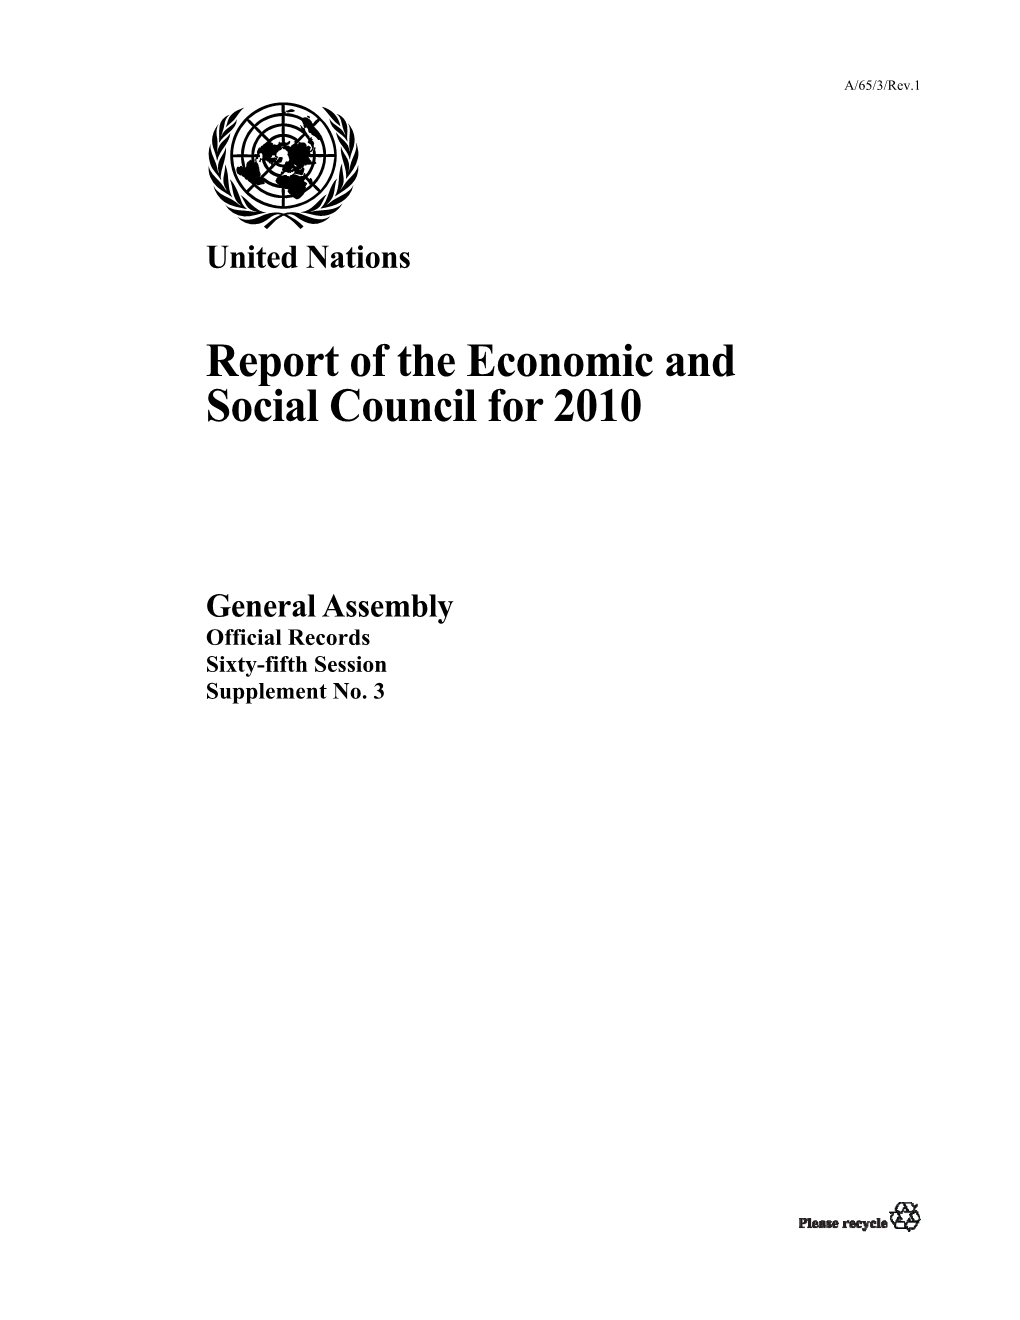 Report of the Economic and Social Council for 2010